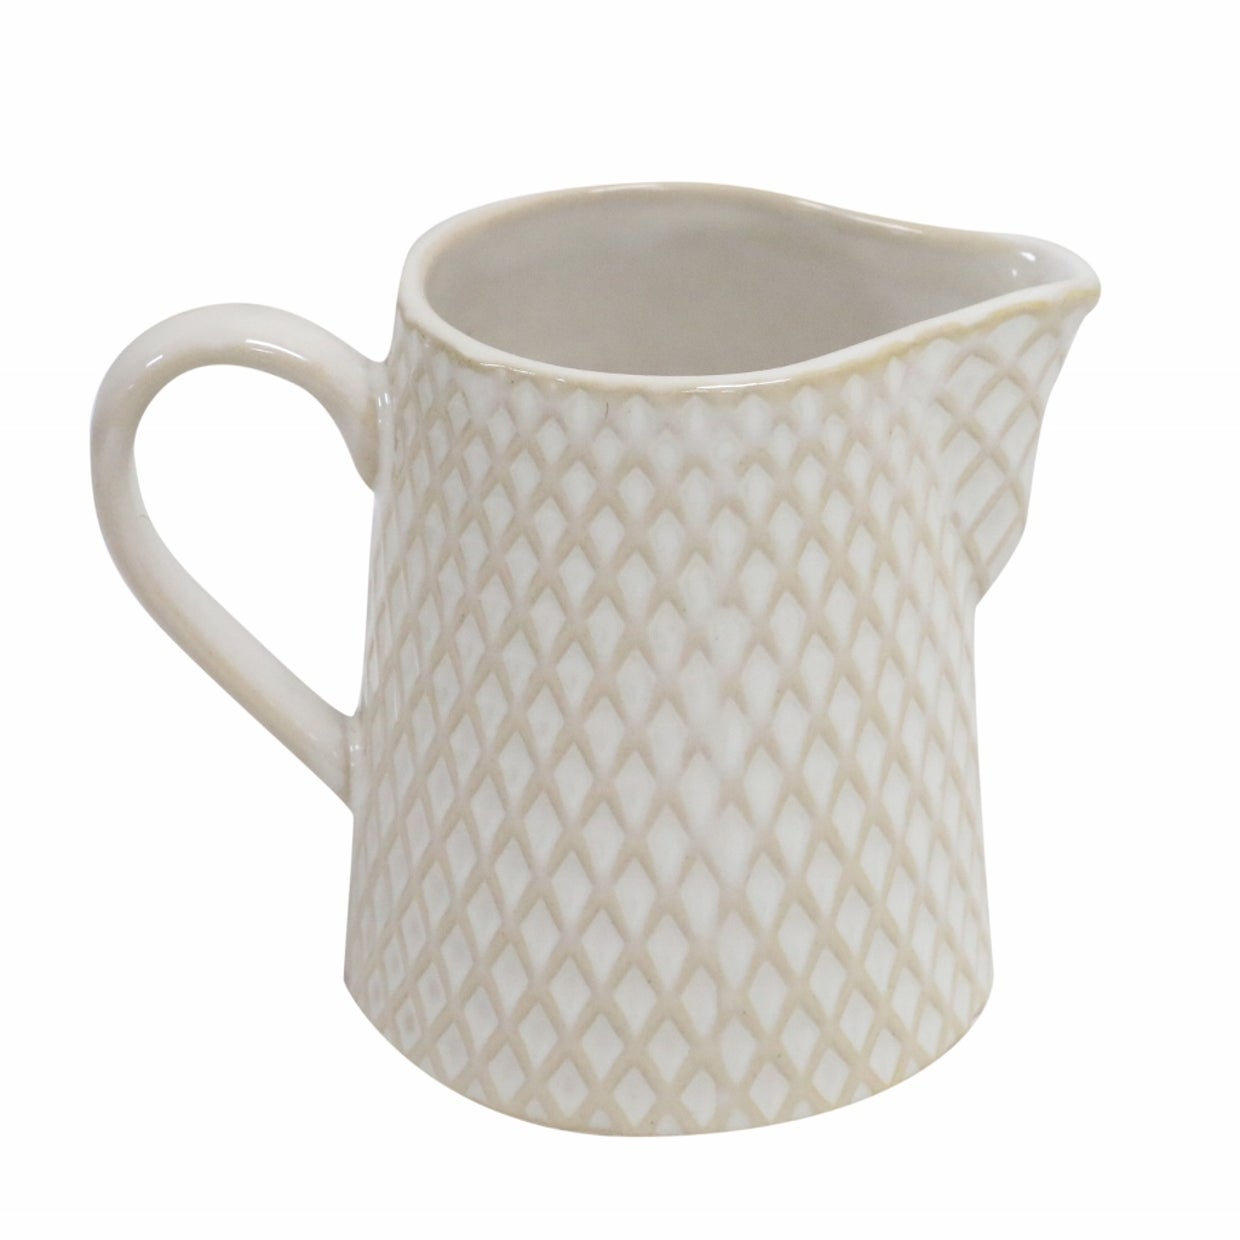 DETAILLE SMALL JUG